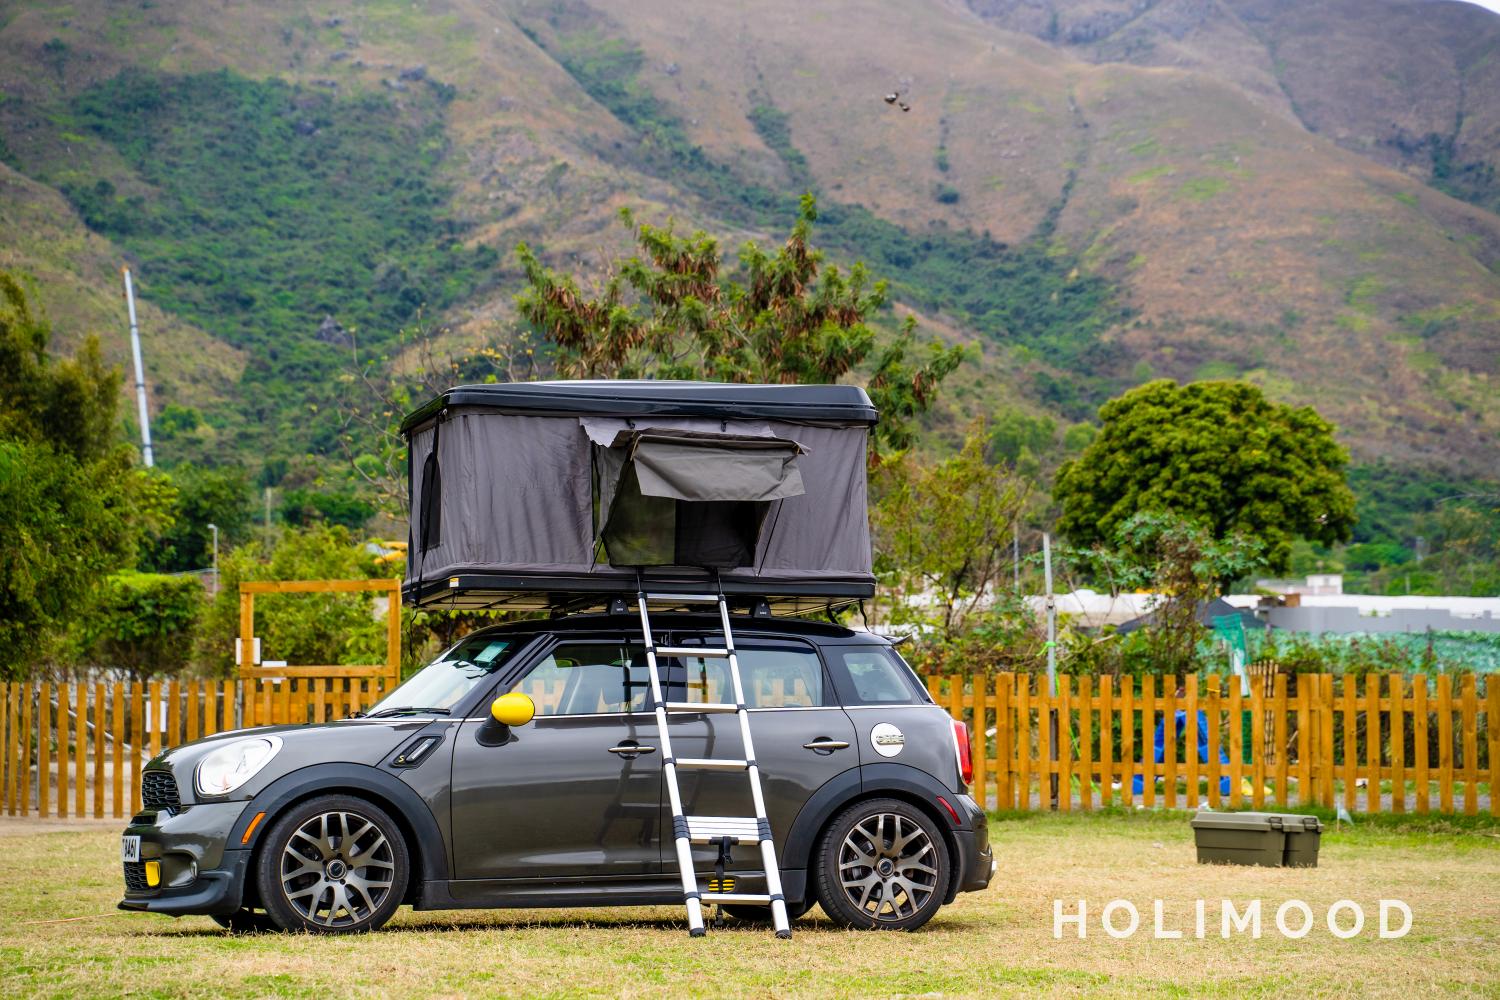 DNA 租車 【Girl Dream Car】Mini Cooper Countryman Roof Camping and Car Camping Experience 13